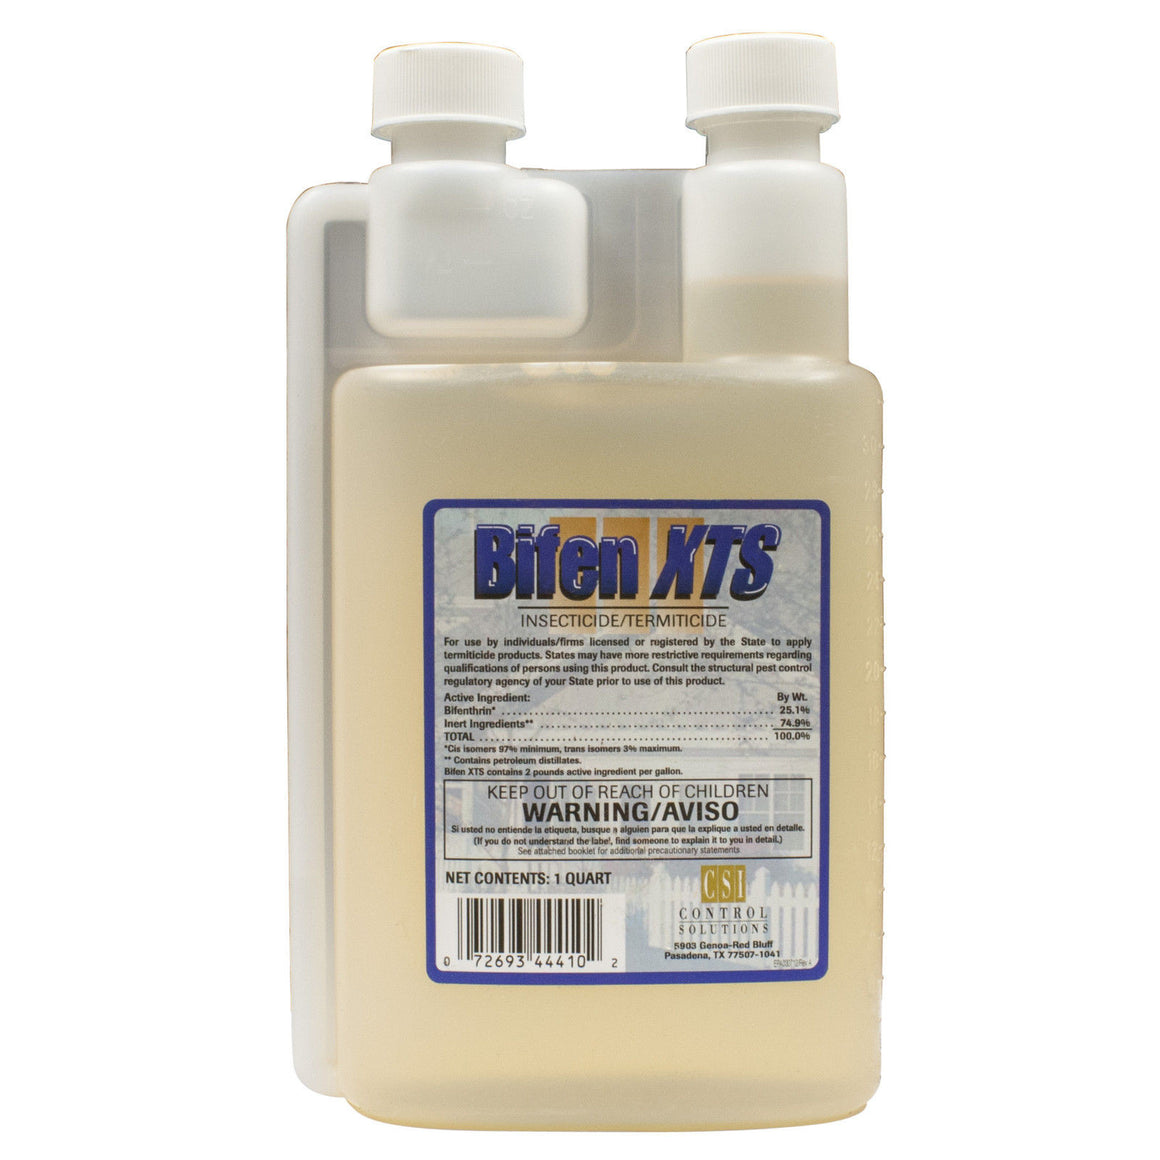 Bifen XTS 25.1% Bifenthrin Insecticide - 1 Qt. - Seed World